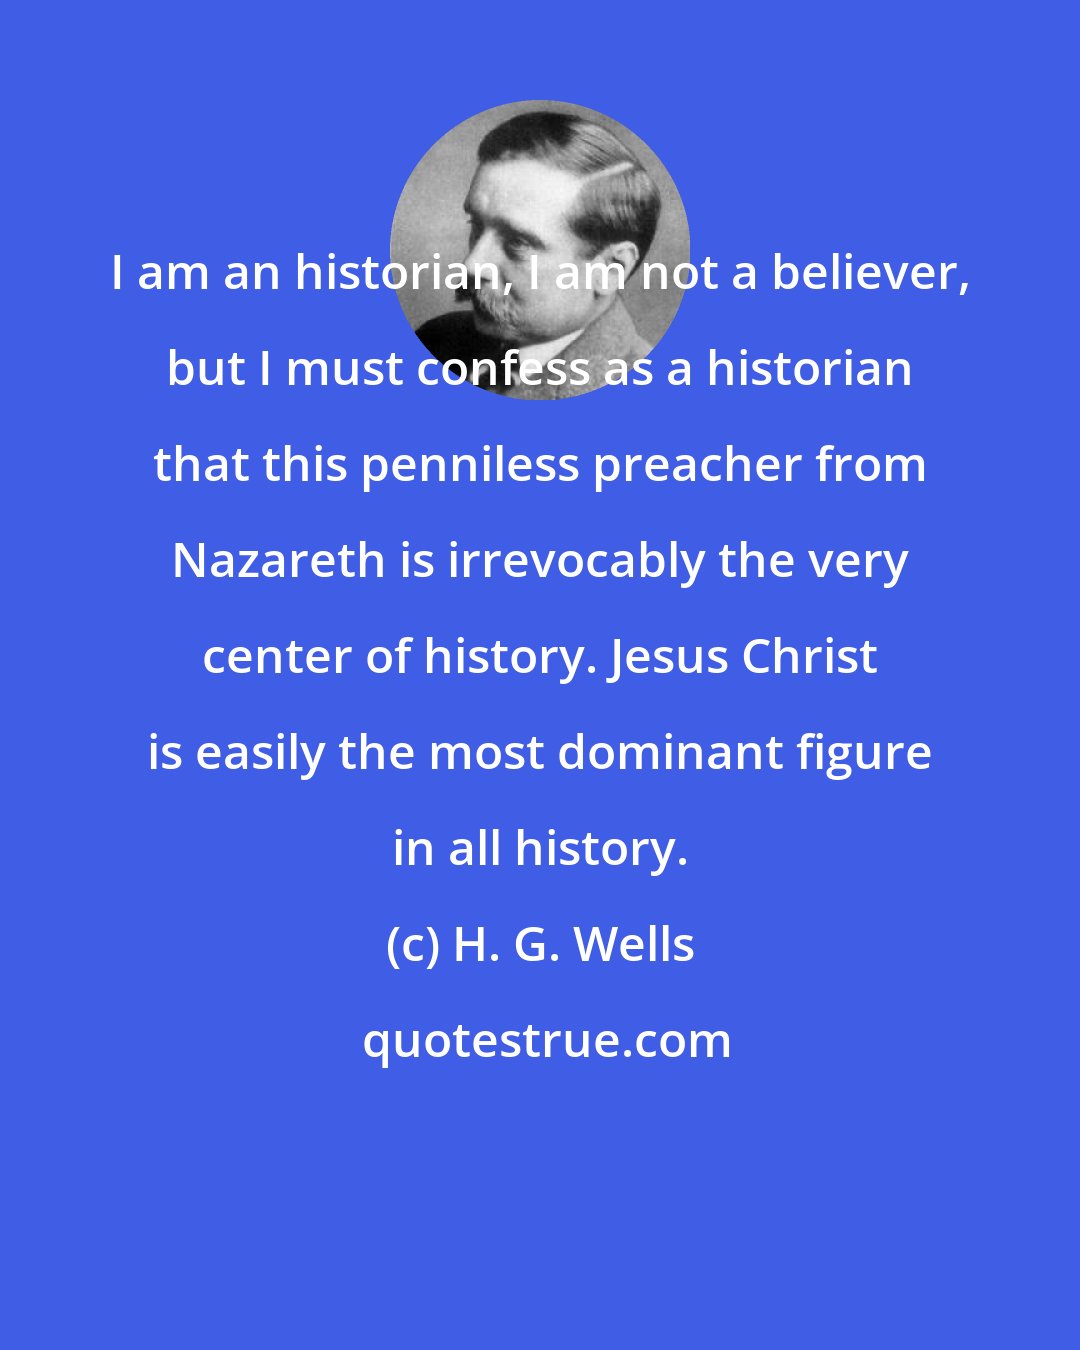 H. G. Wells: I am an historian, I am not a believer, but I must confess as a historian that this penniless preacher from Nazareth is irrevocably the very center of history. Jesus Christ is easily the most dominant figure in all history.